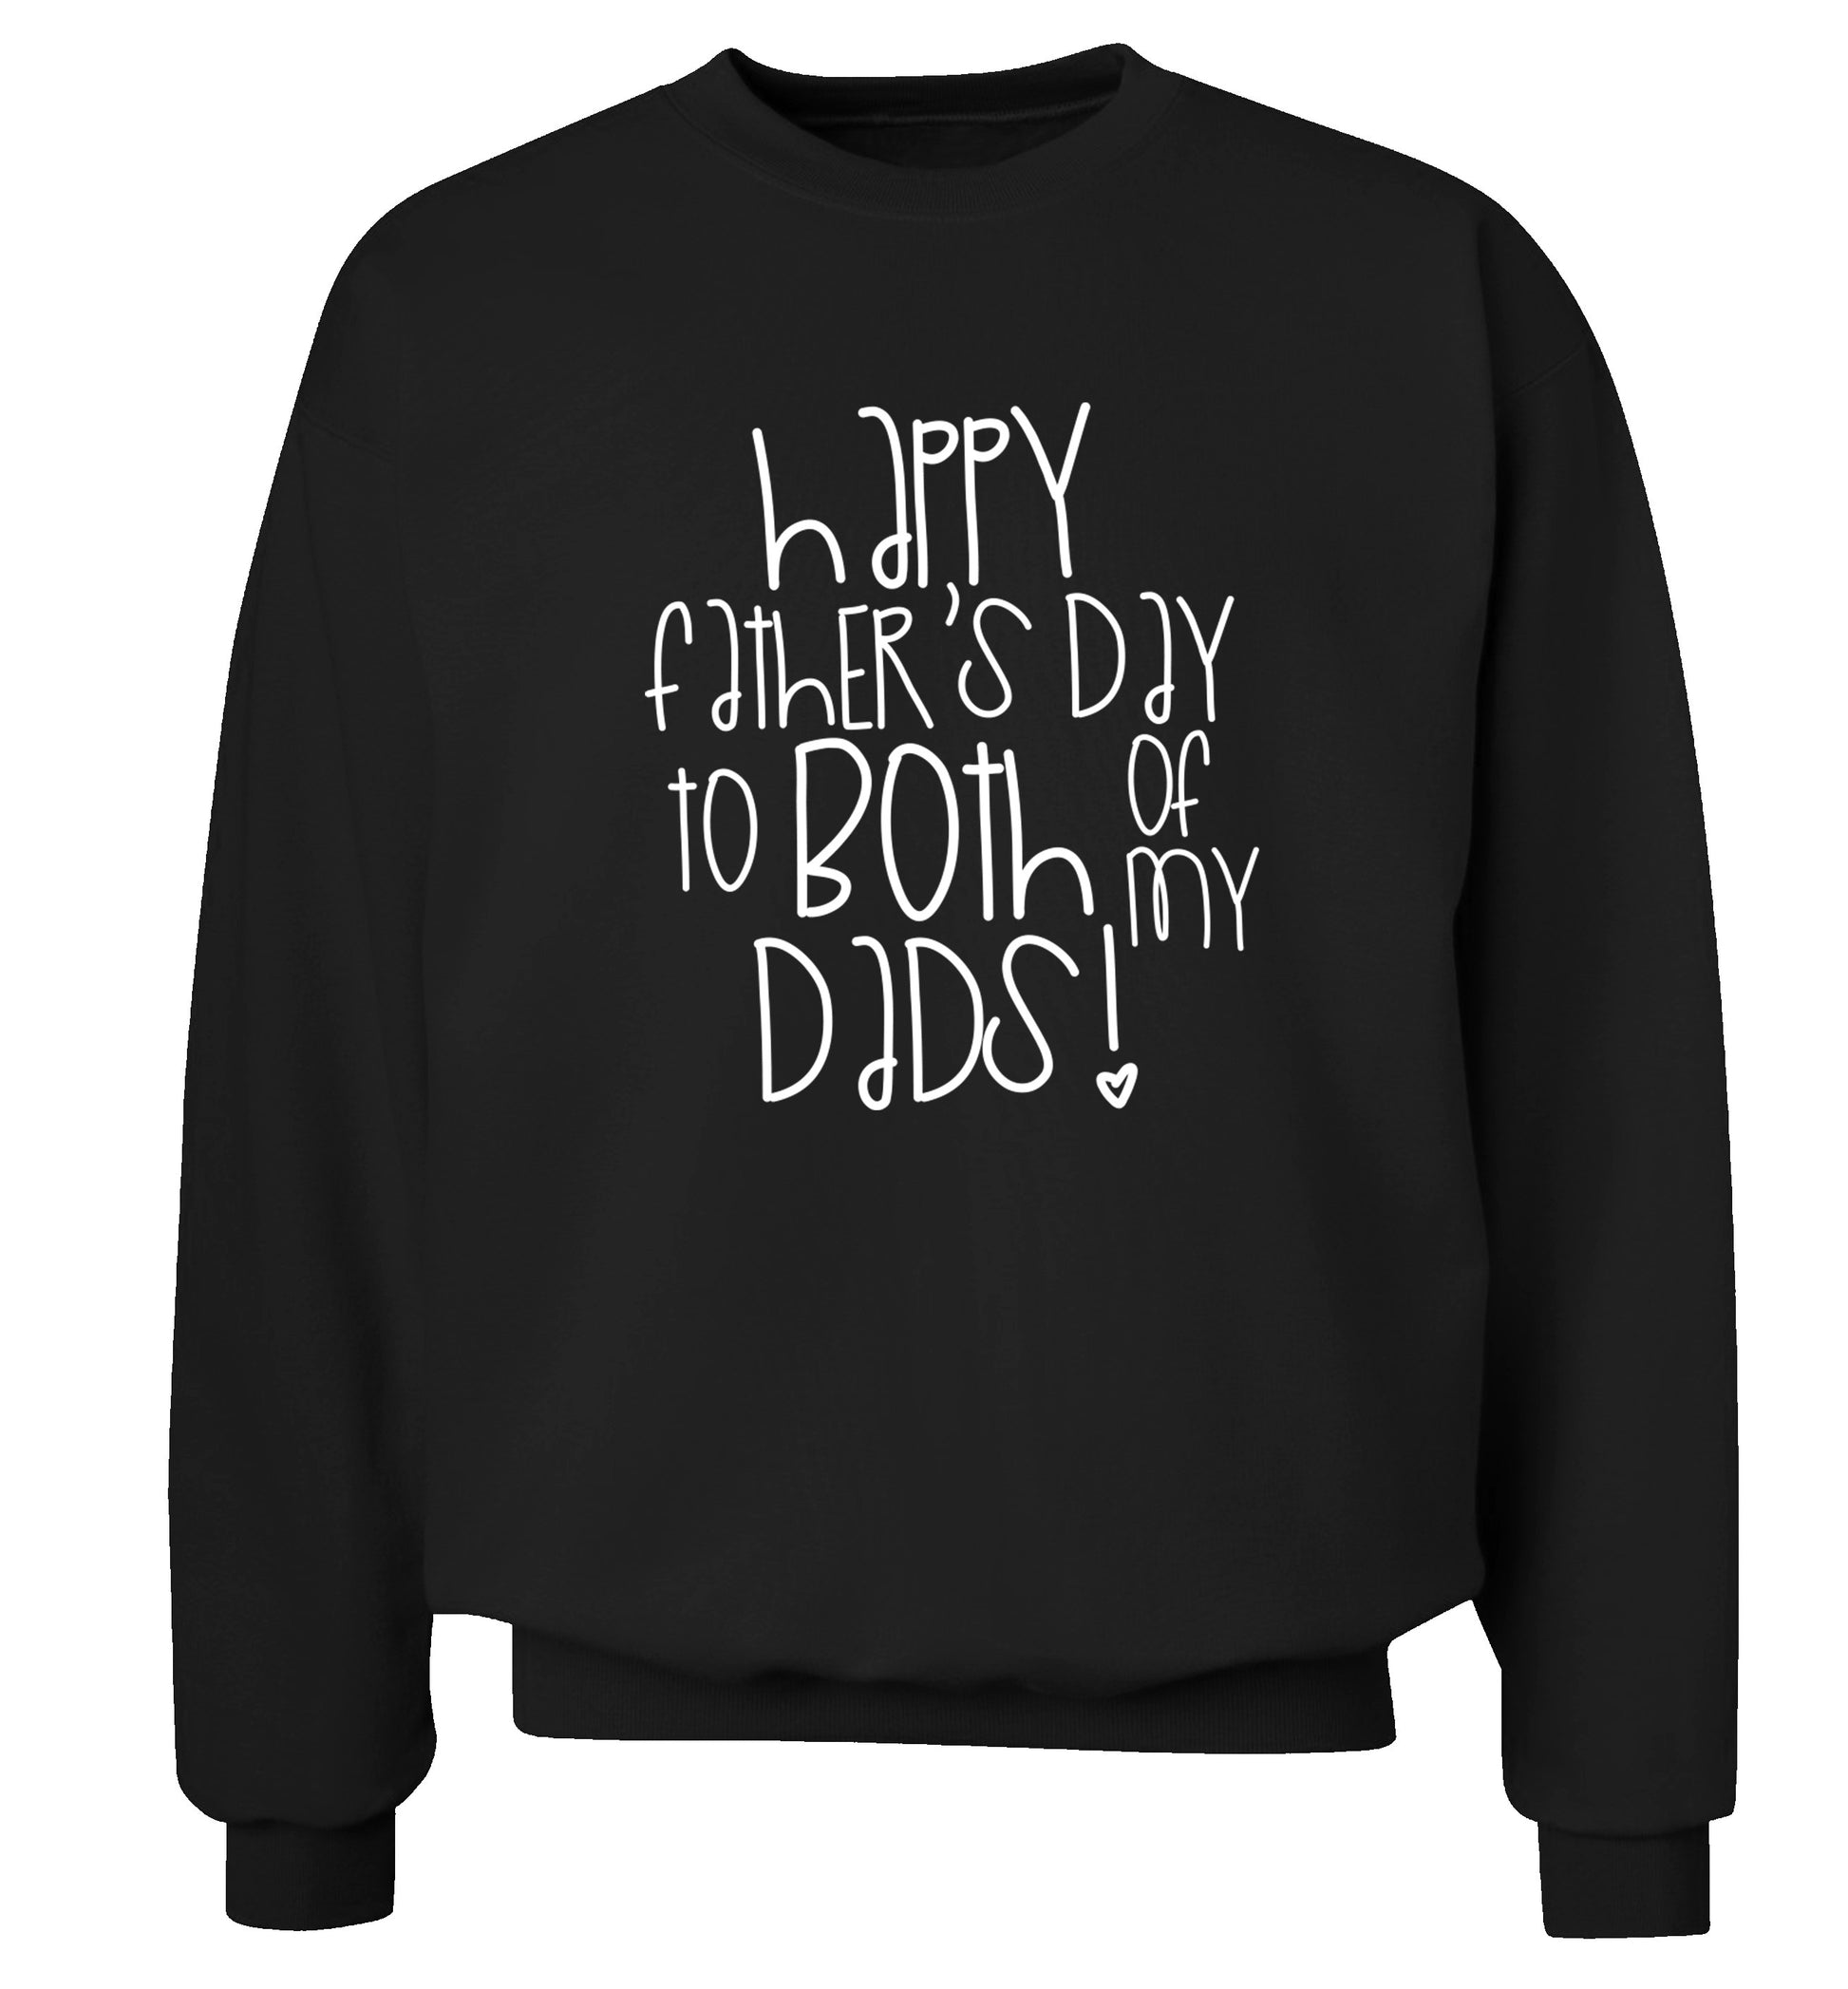 Happy father's day to both of my dads Adult's unisex black Sweater 2XL